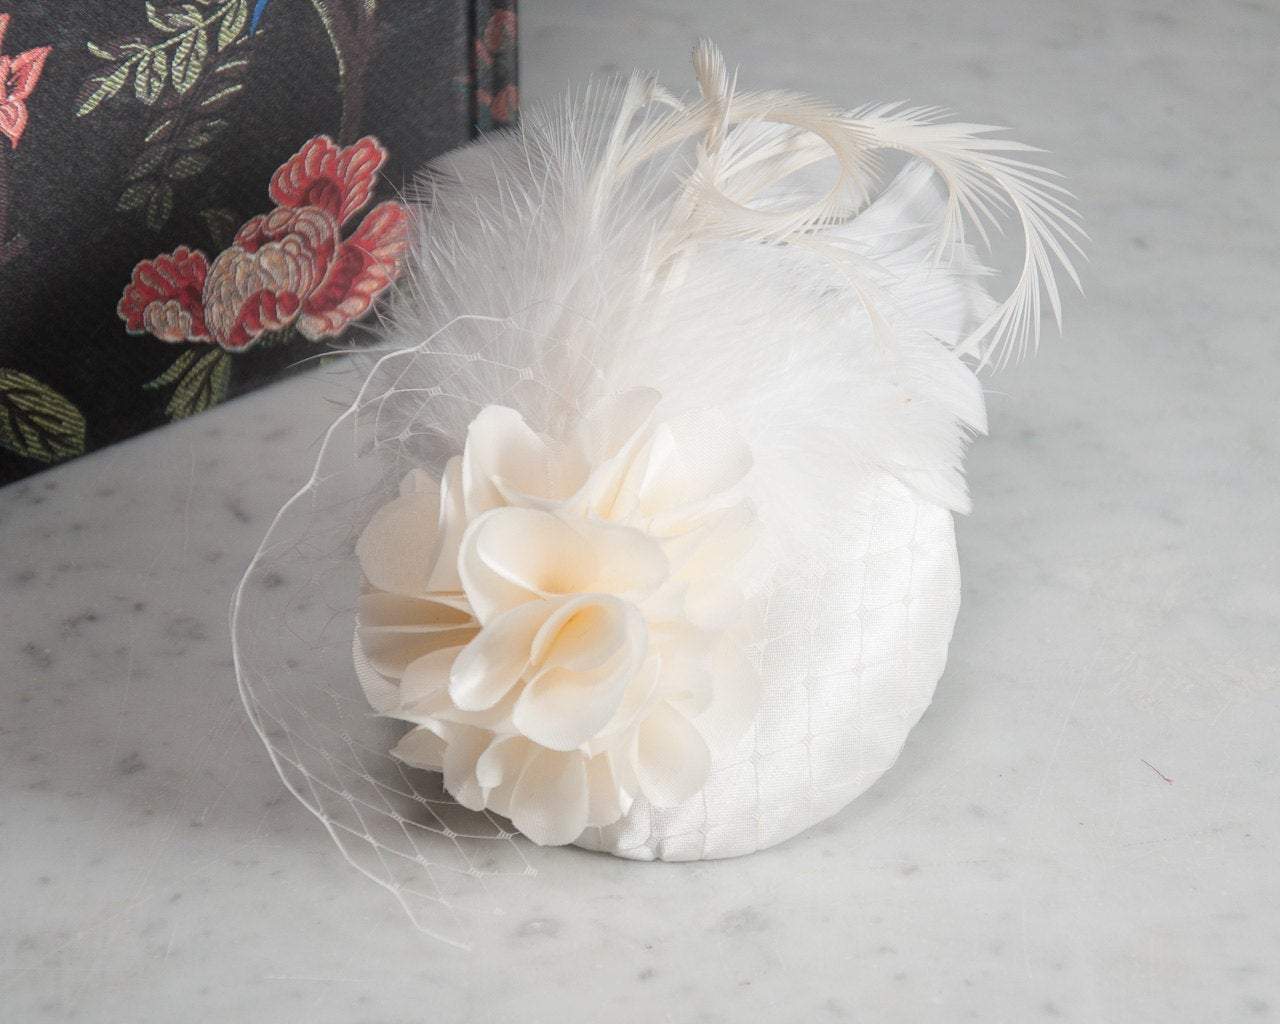 FASCINATOR - BRIDAL HEADPIECE WITH FEATHERS AND VEIL DETAILS, A DREAMY CREAM COLOURED CLOUD © Seegang Berlin